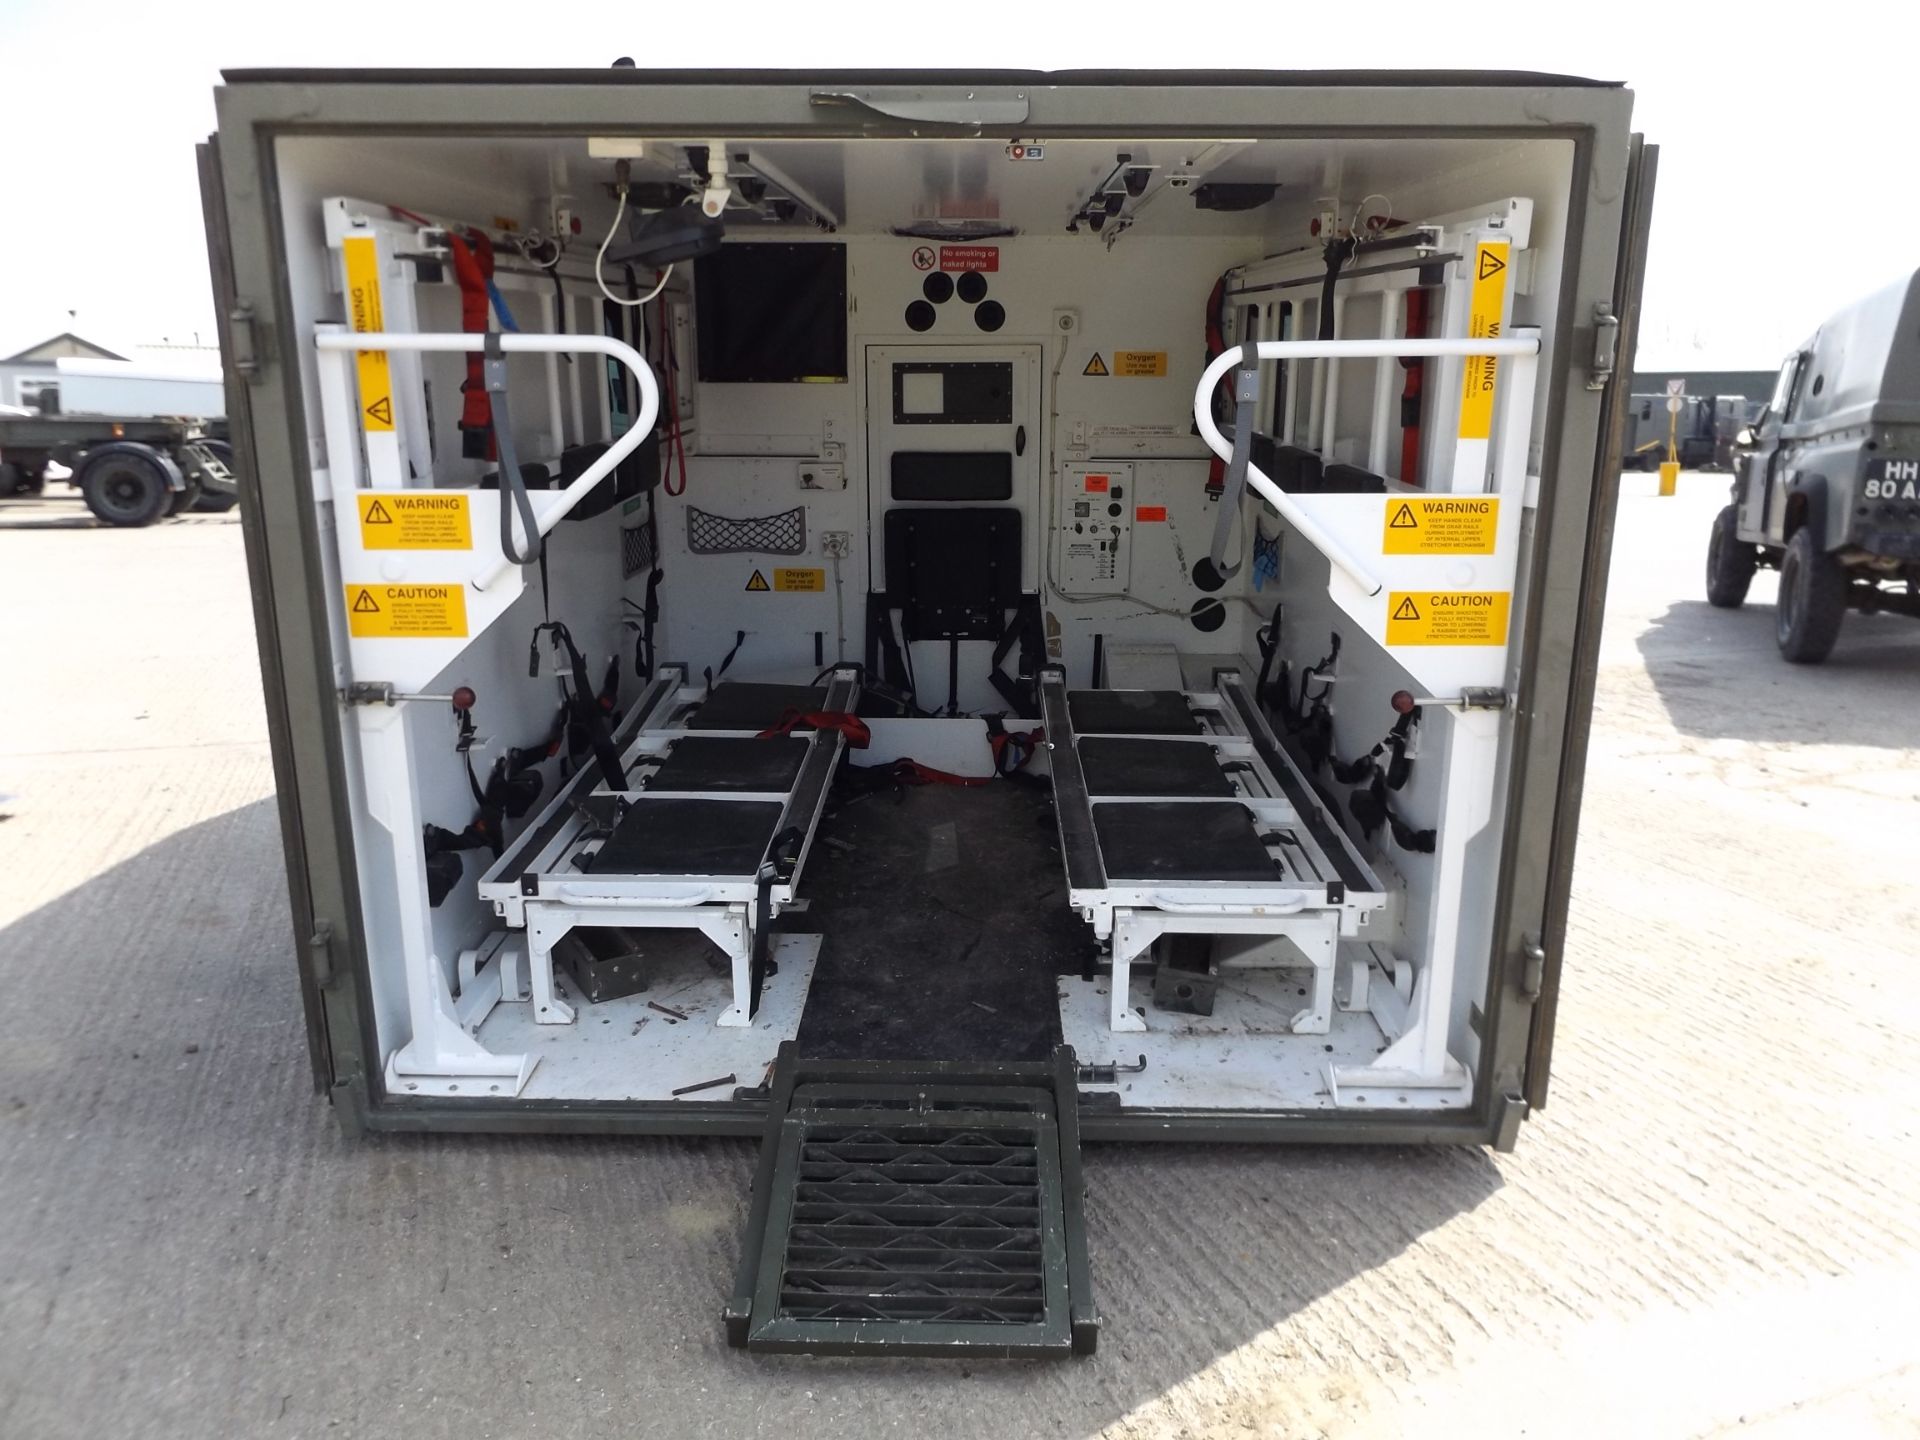 Land Rover Pulse Ambulance 130 Take Off Marshall Rear Body Assembly - Image 8 of 12